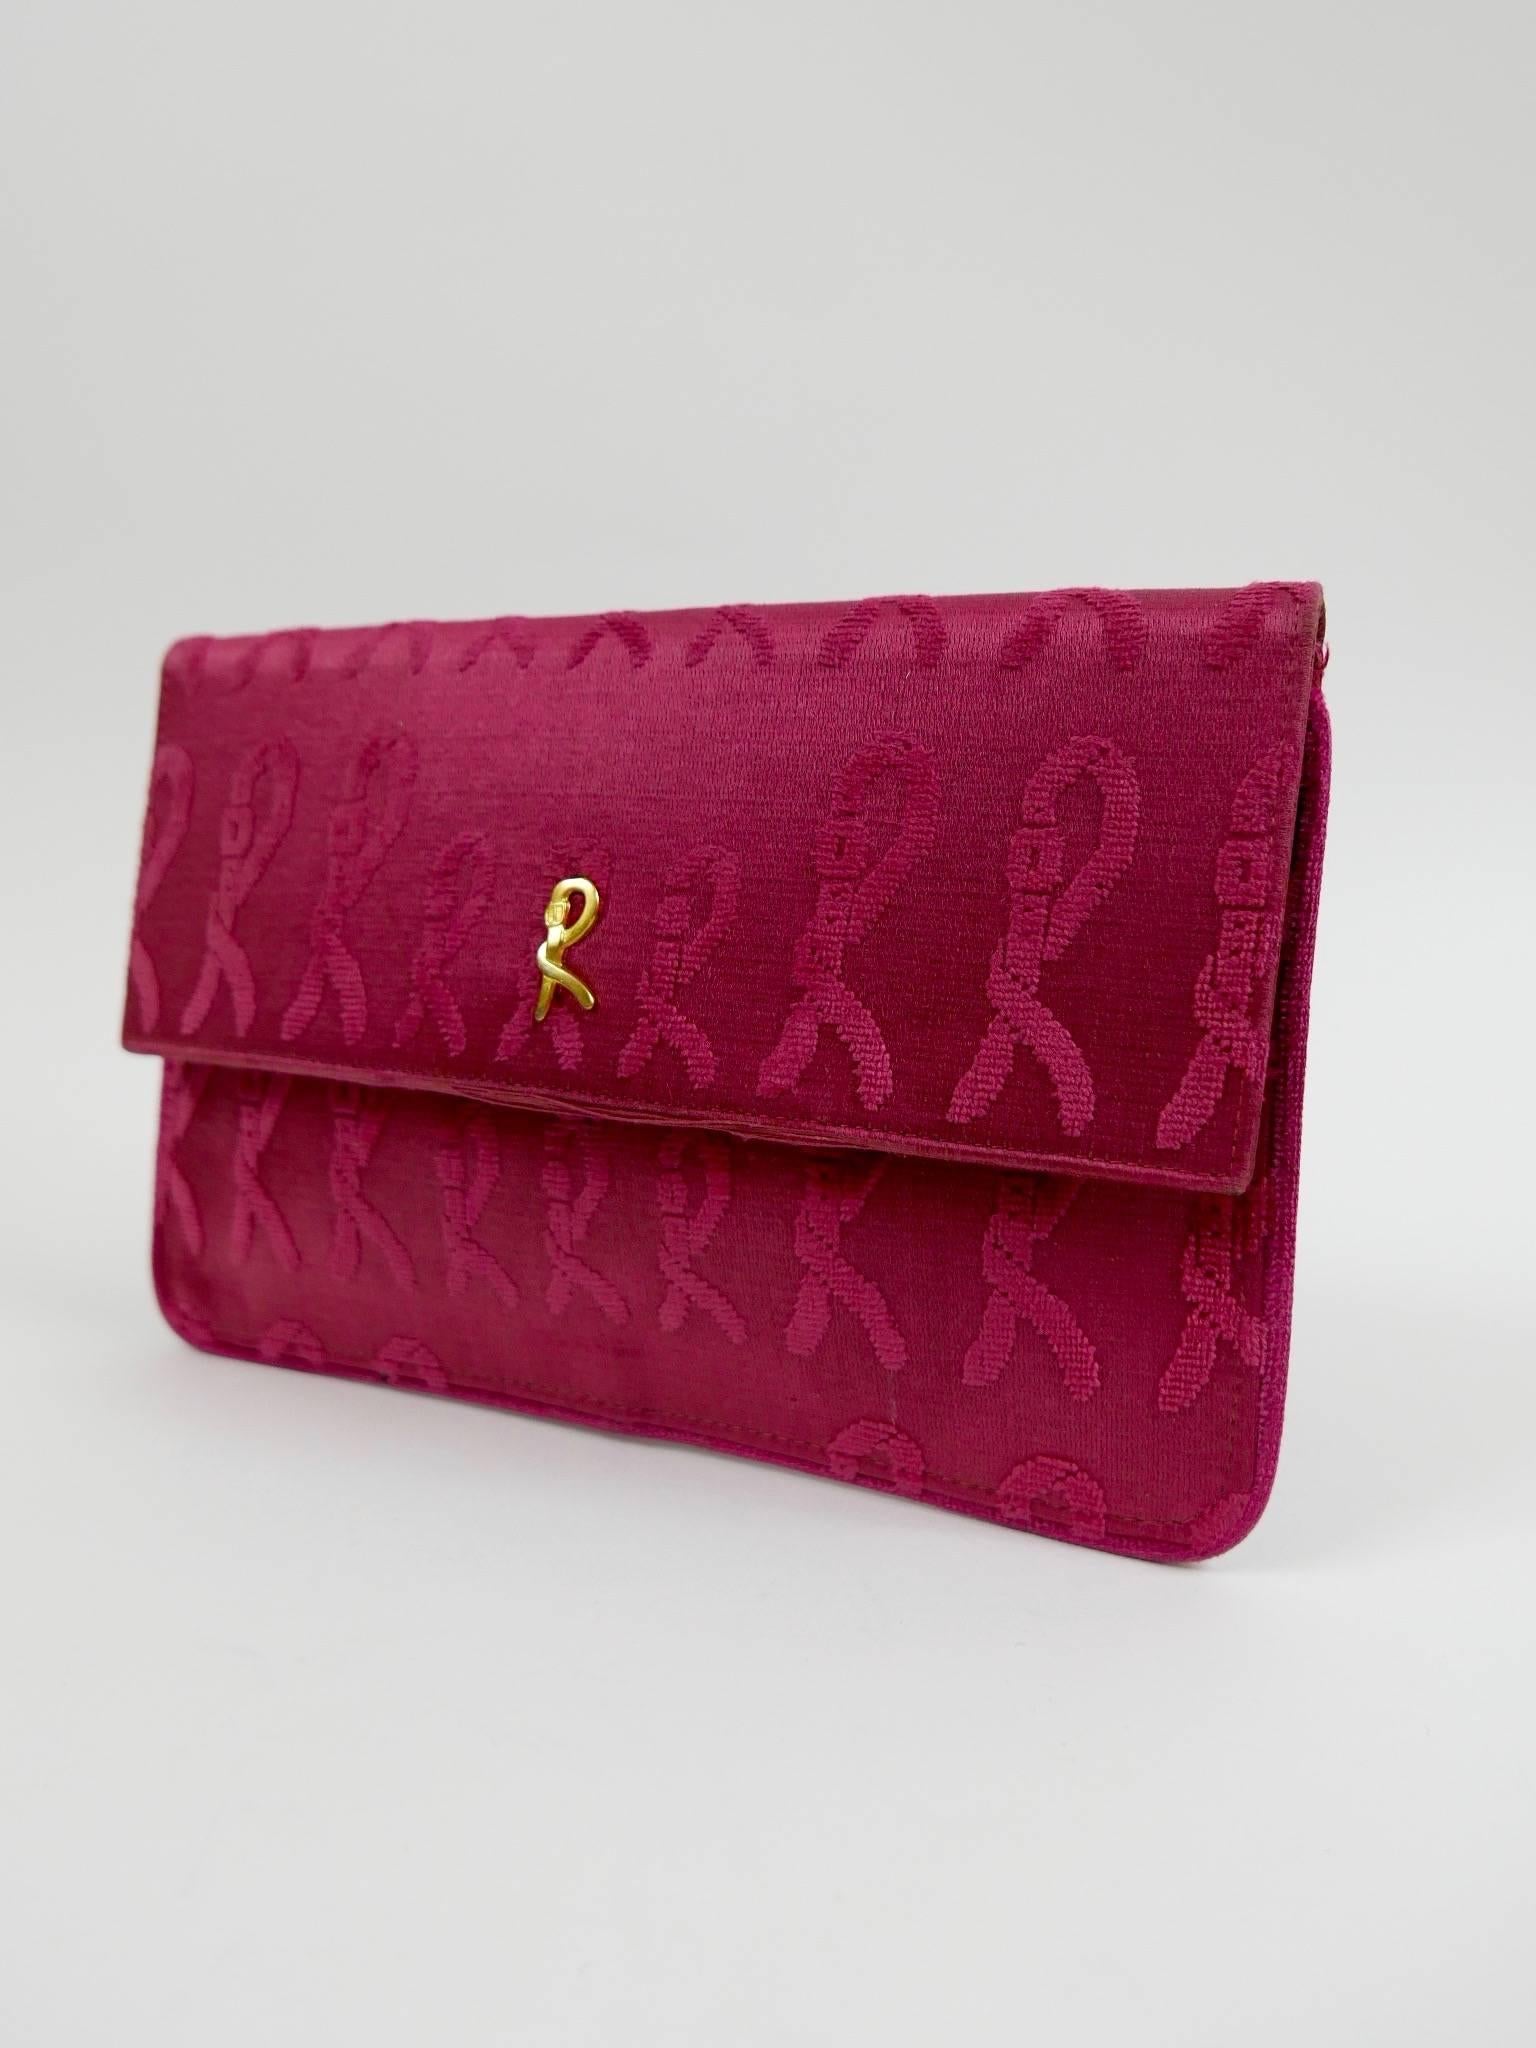 This authentic 1960s Roberta Di Camerino purse is in a red fabric with soft velvet cut with typical prints of the designer. It has golden metal designers signature ''R